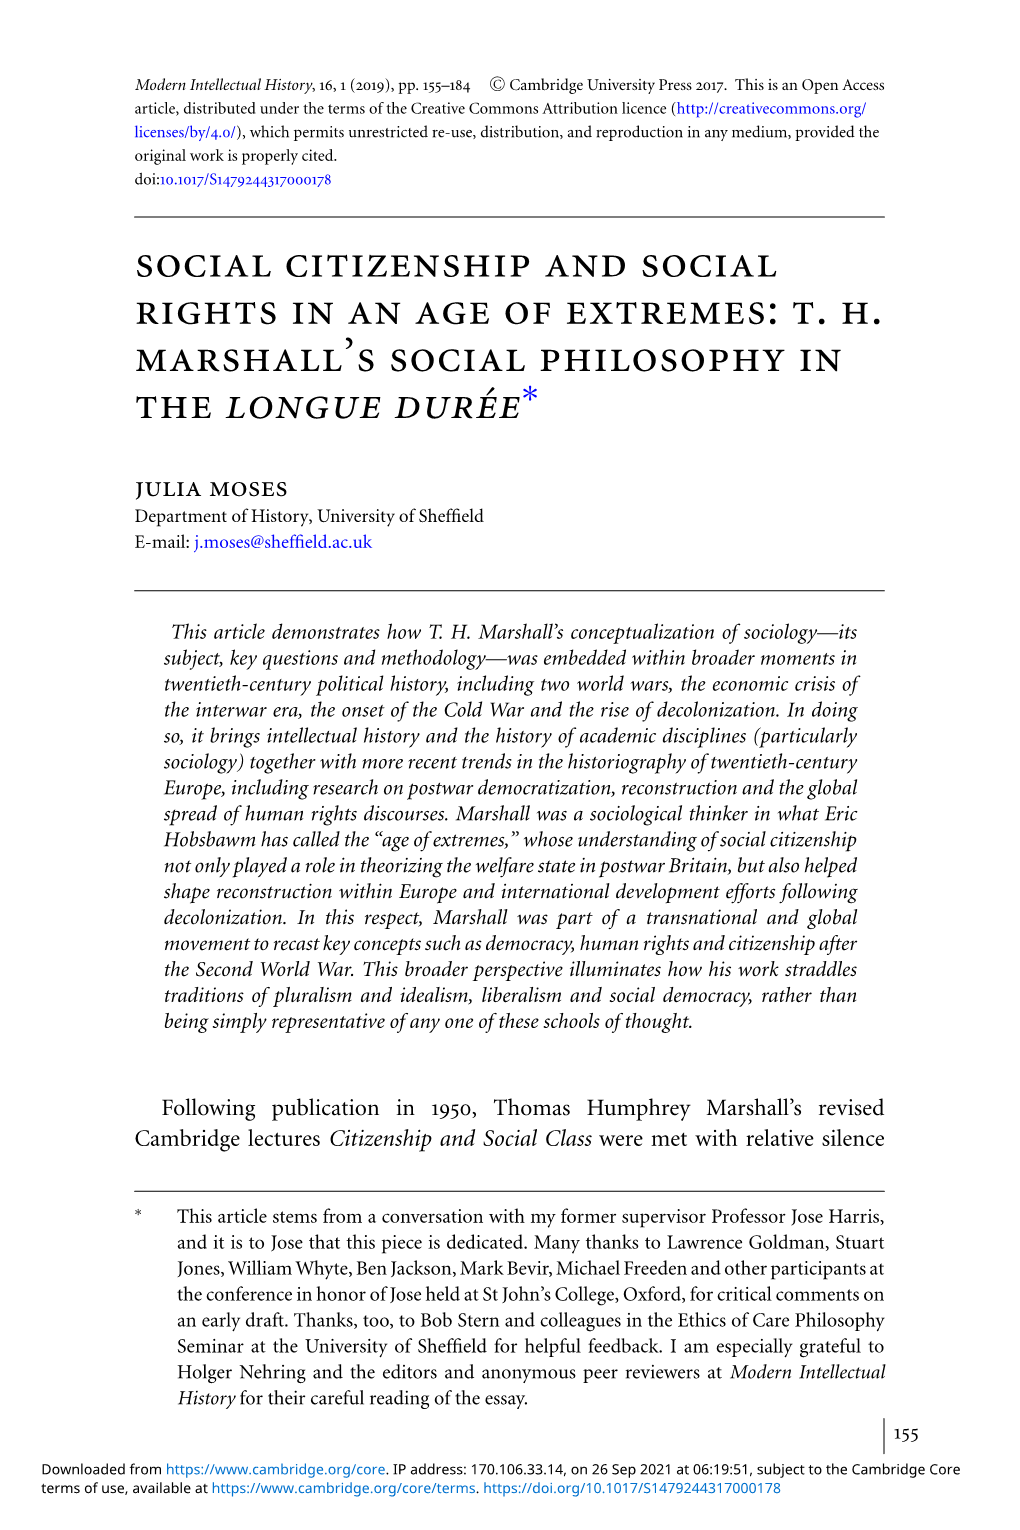 Social Citizenship and Social Rights in an Age of Extremes: T. H. Marshall's Social Philosophy in the Longue Durée